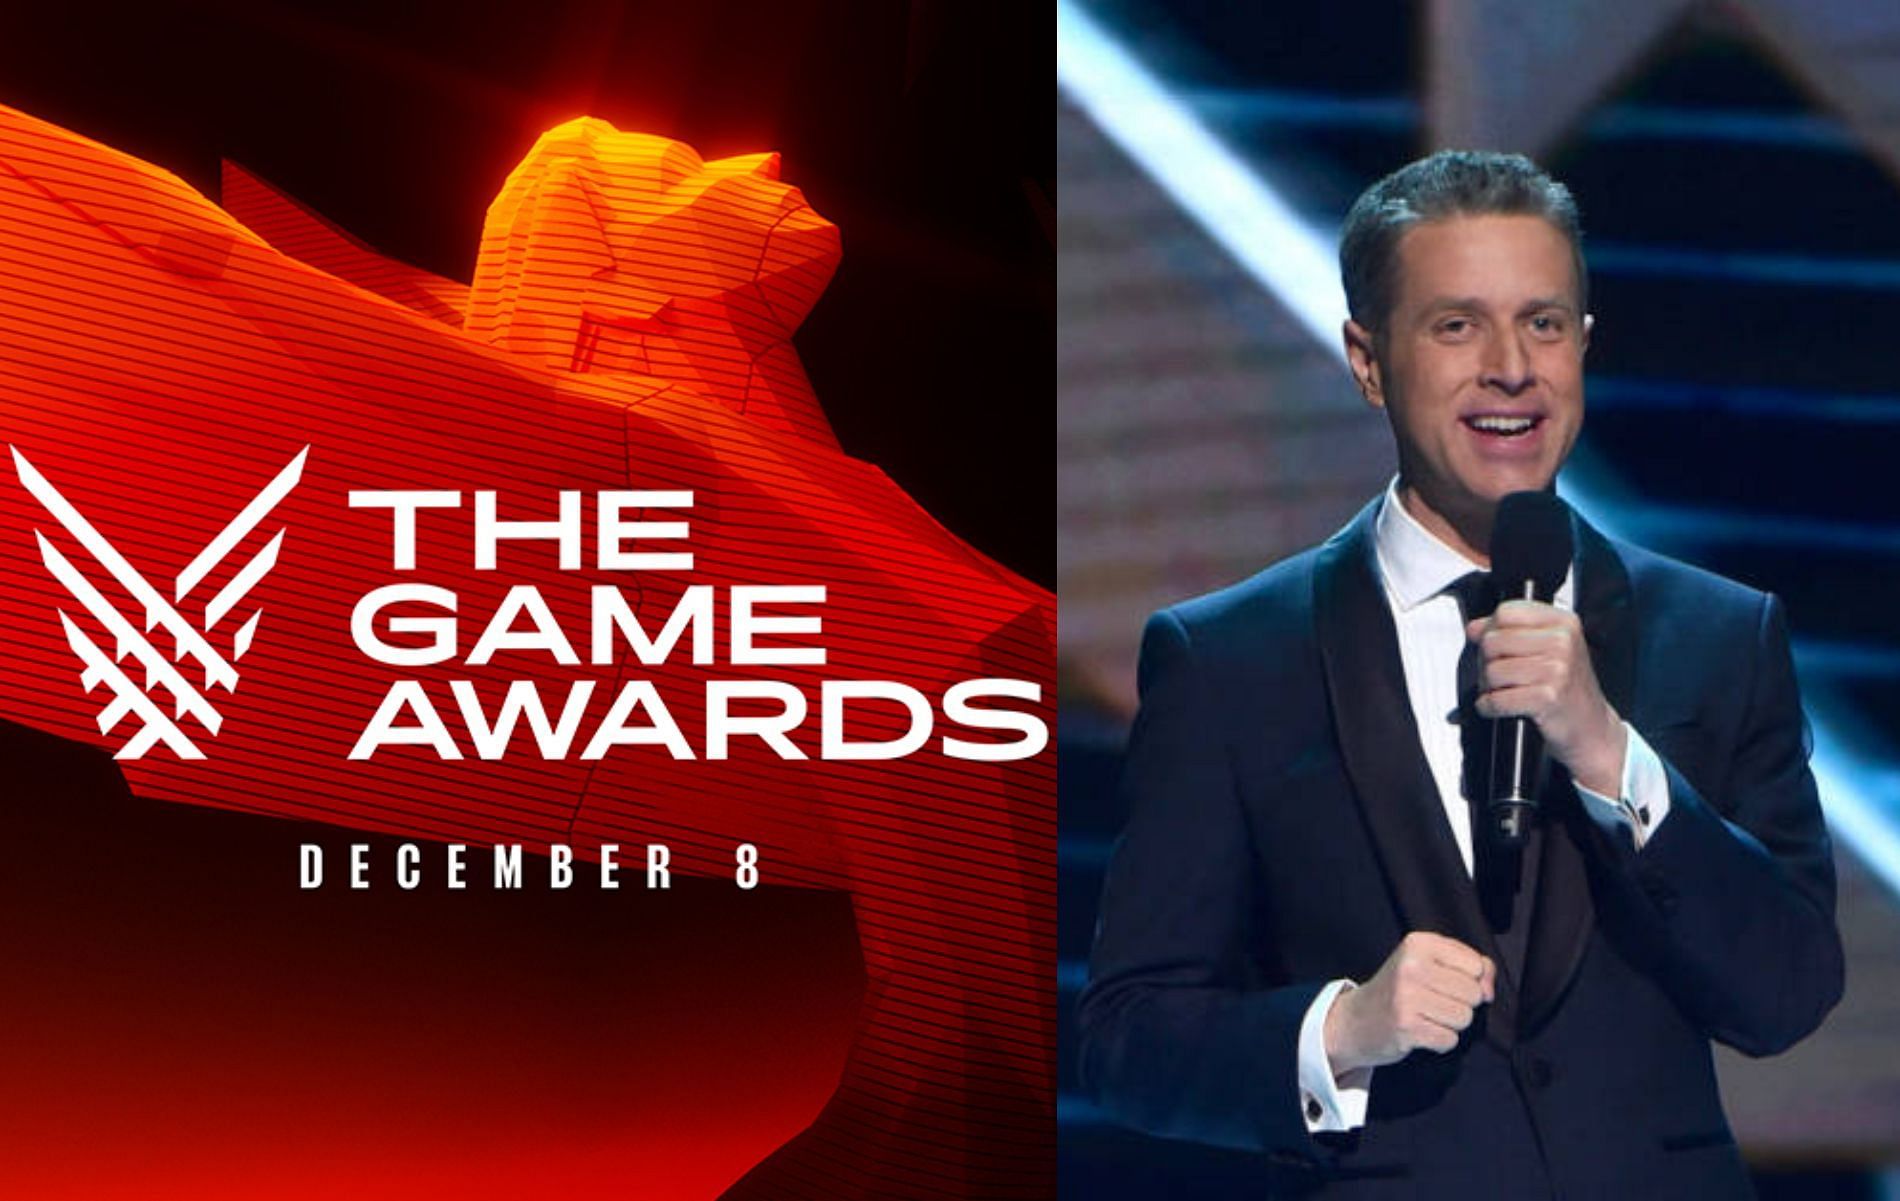 The Game Awards 2022 Date Announced